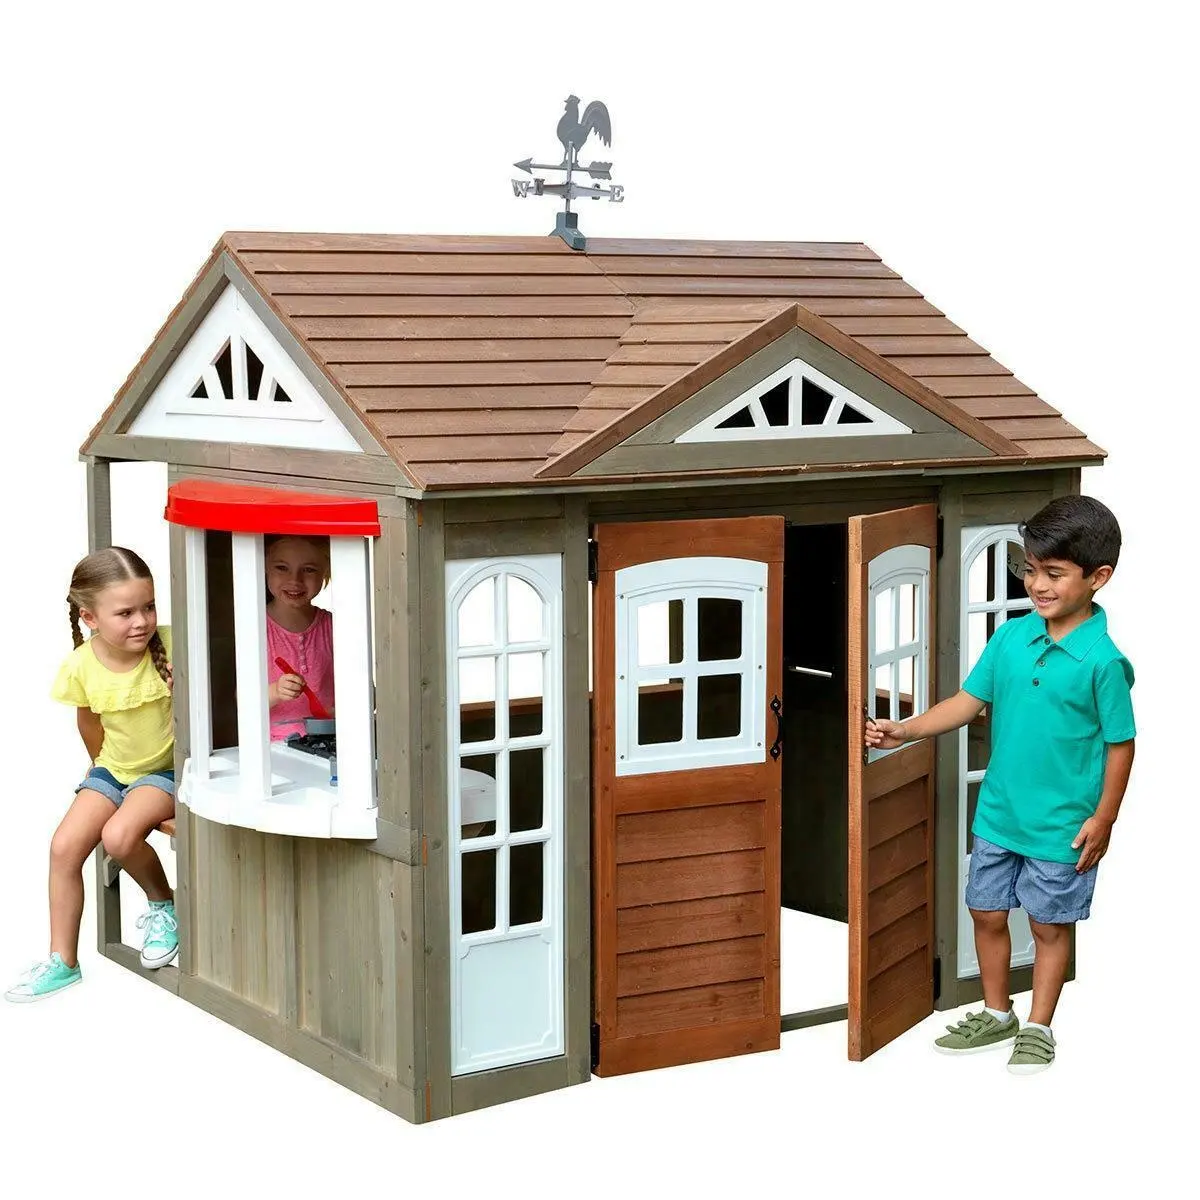 Children Wooden Playhouse Outdoor Fun With Kitchen And Sink Burners